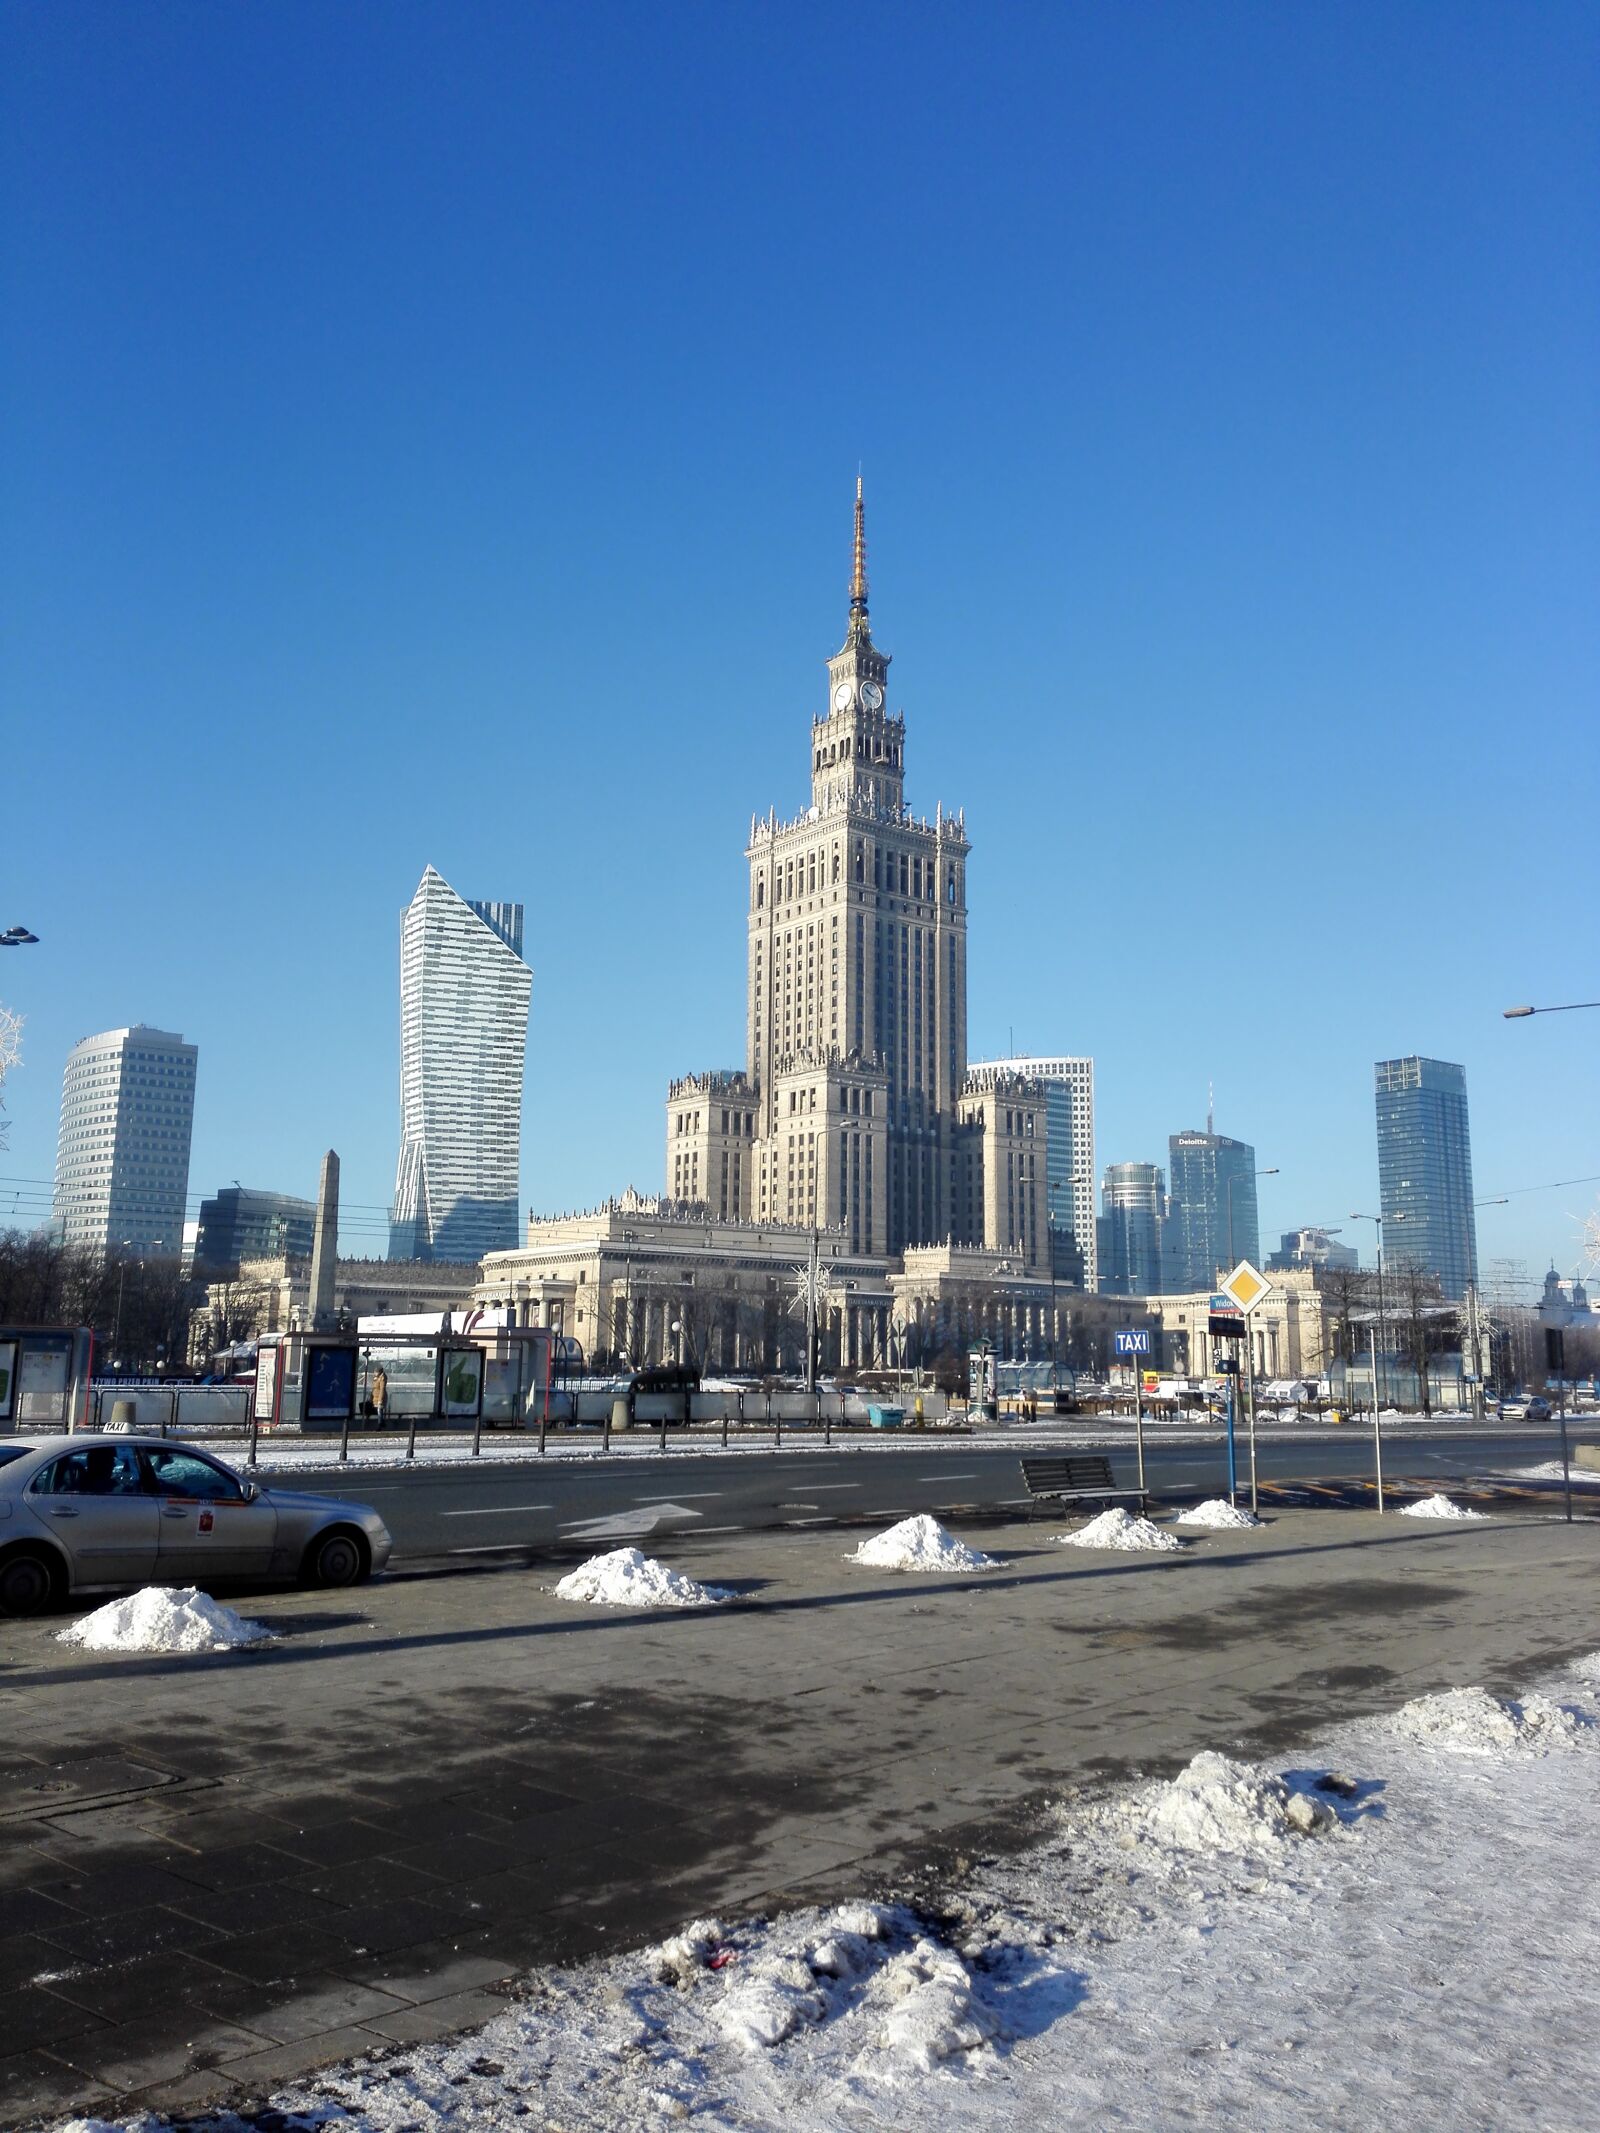 HUAWEI Mate 7 sample photo. Cialis, warsaw, palace of photography